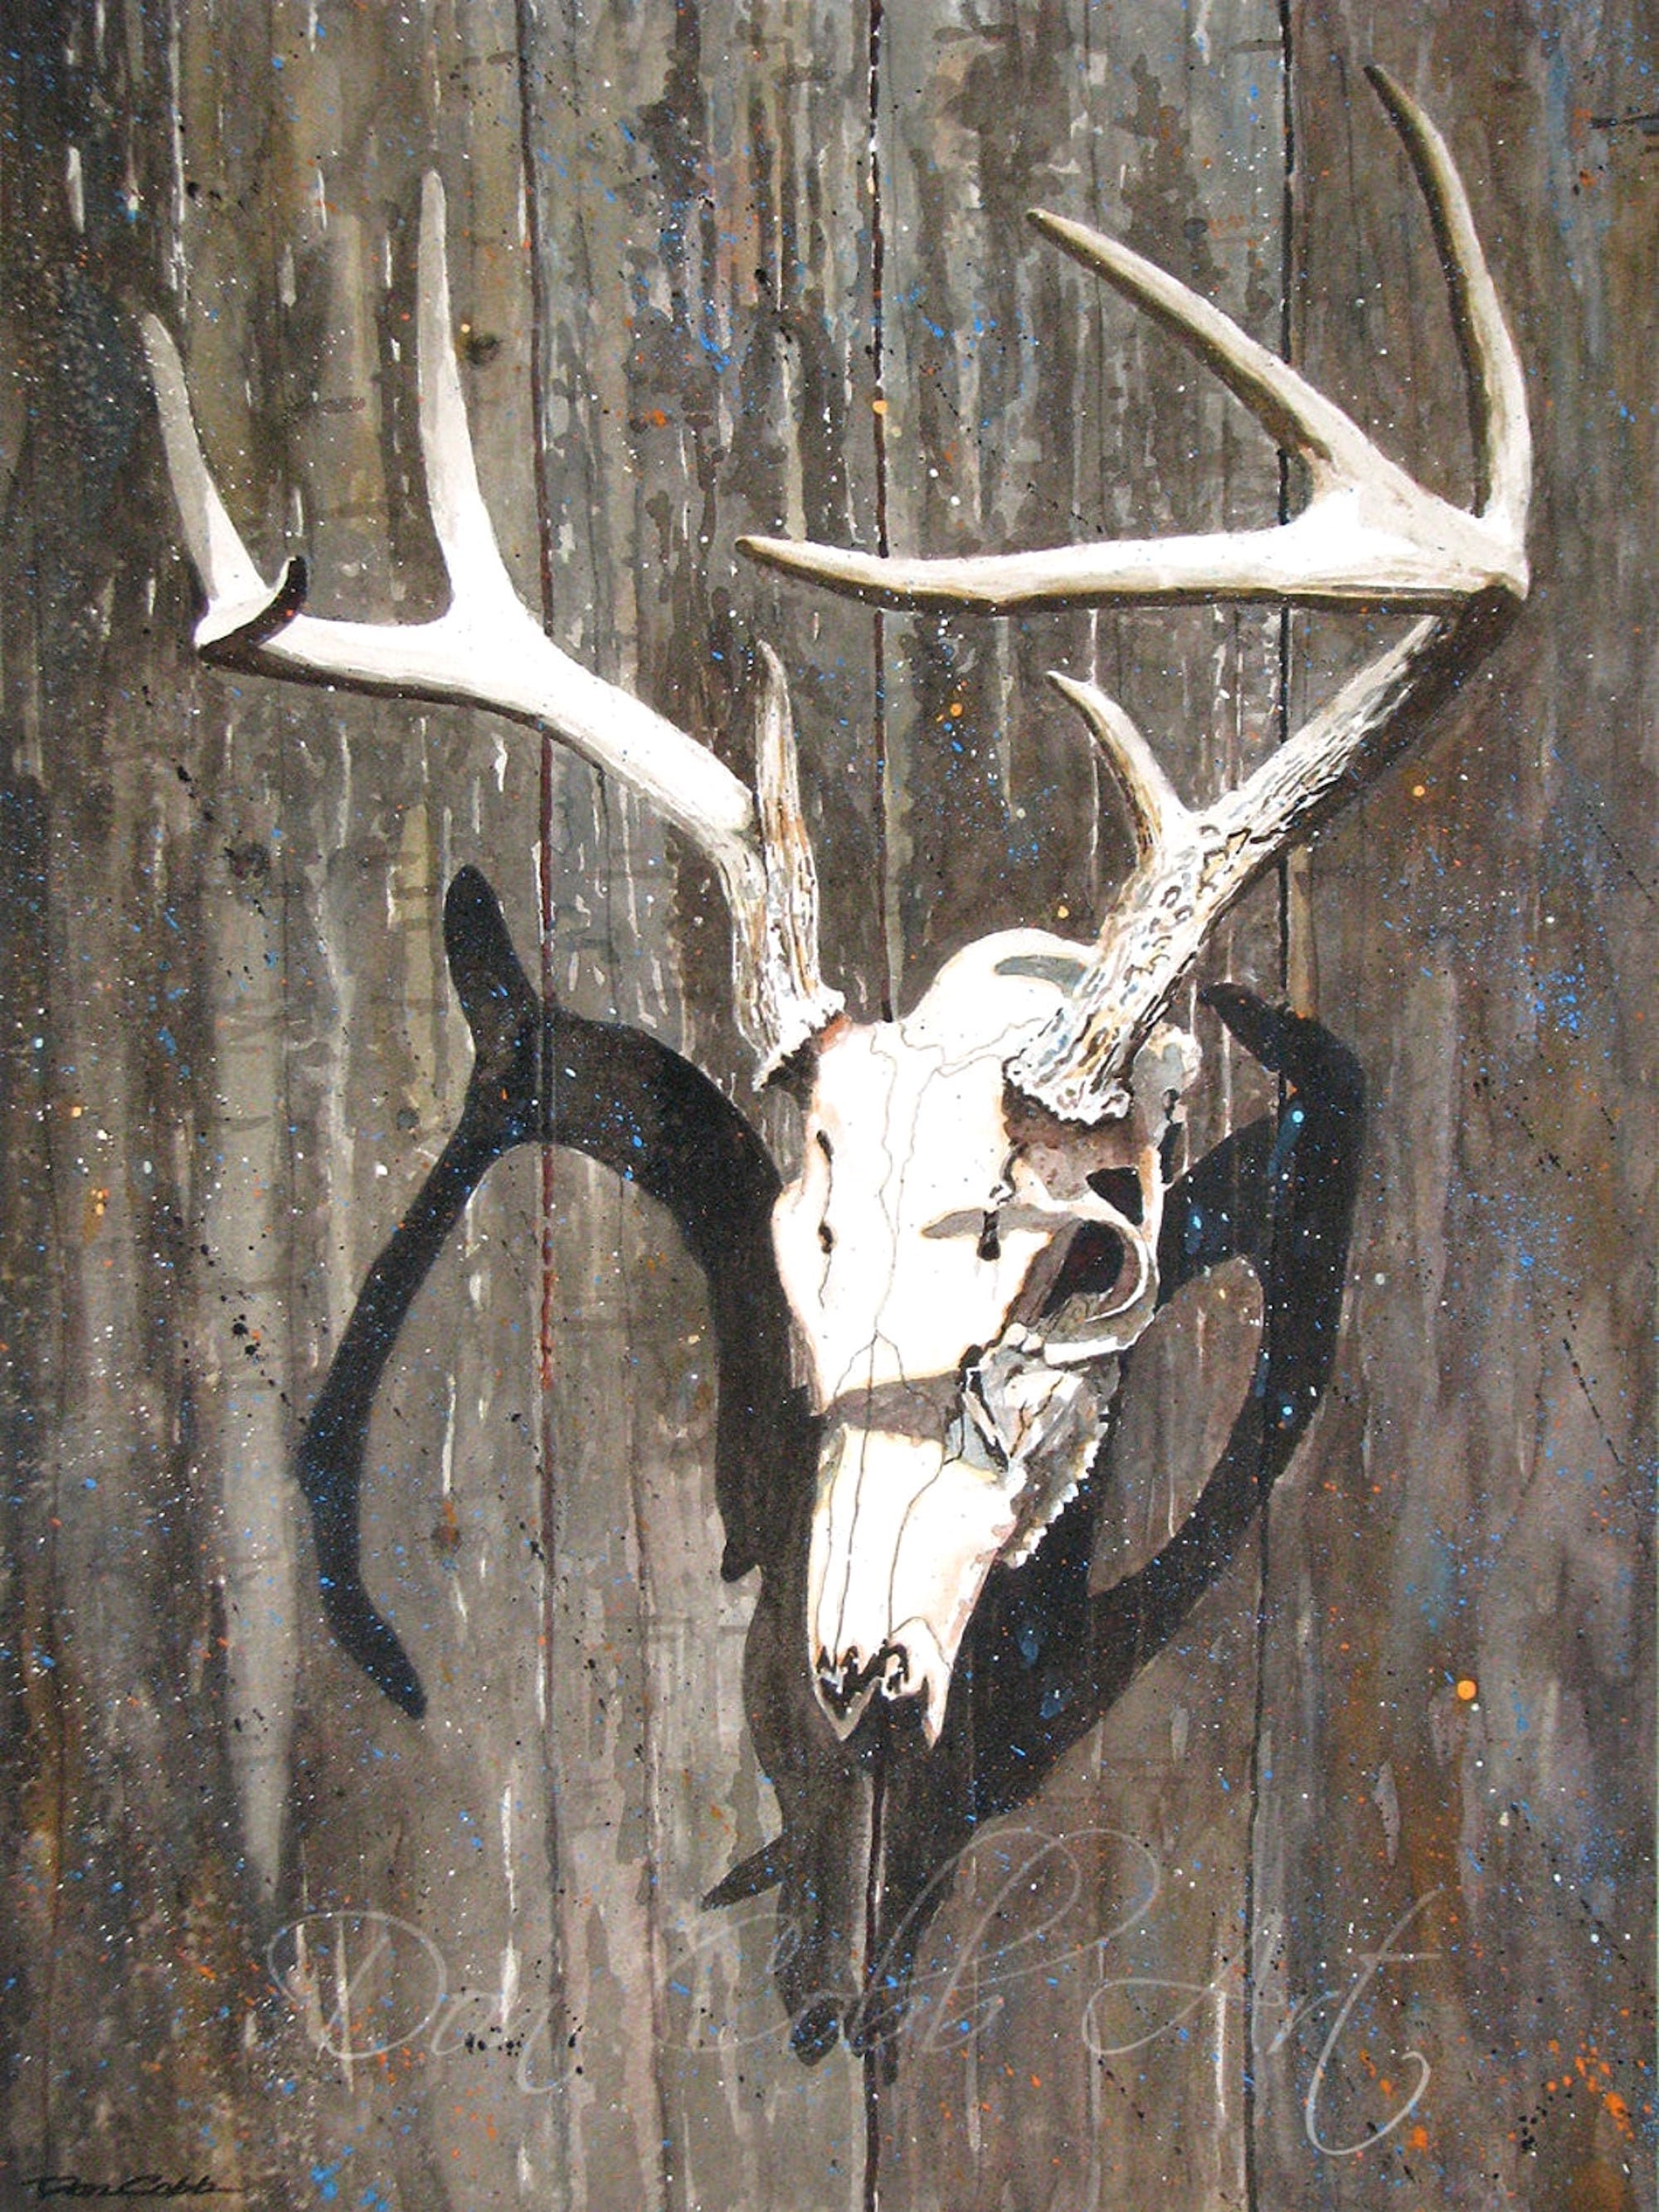 Deer Antlers and Skull Art Whitetail Spirit  Art Prints Free Shipping! Framed Prints and Canvas Prints